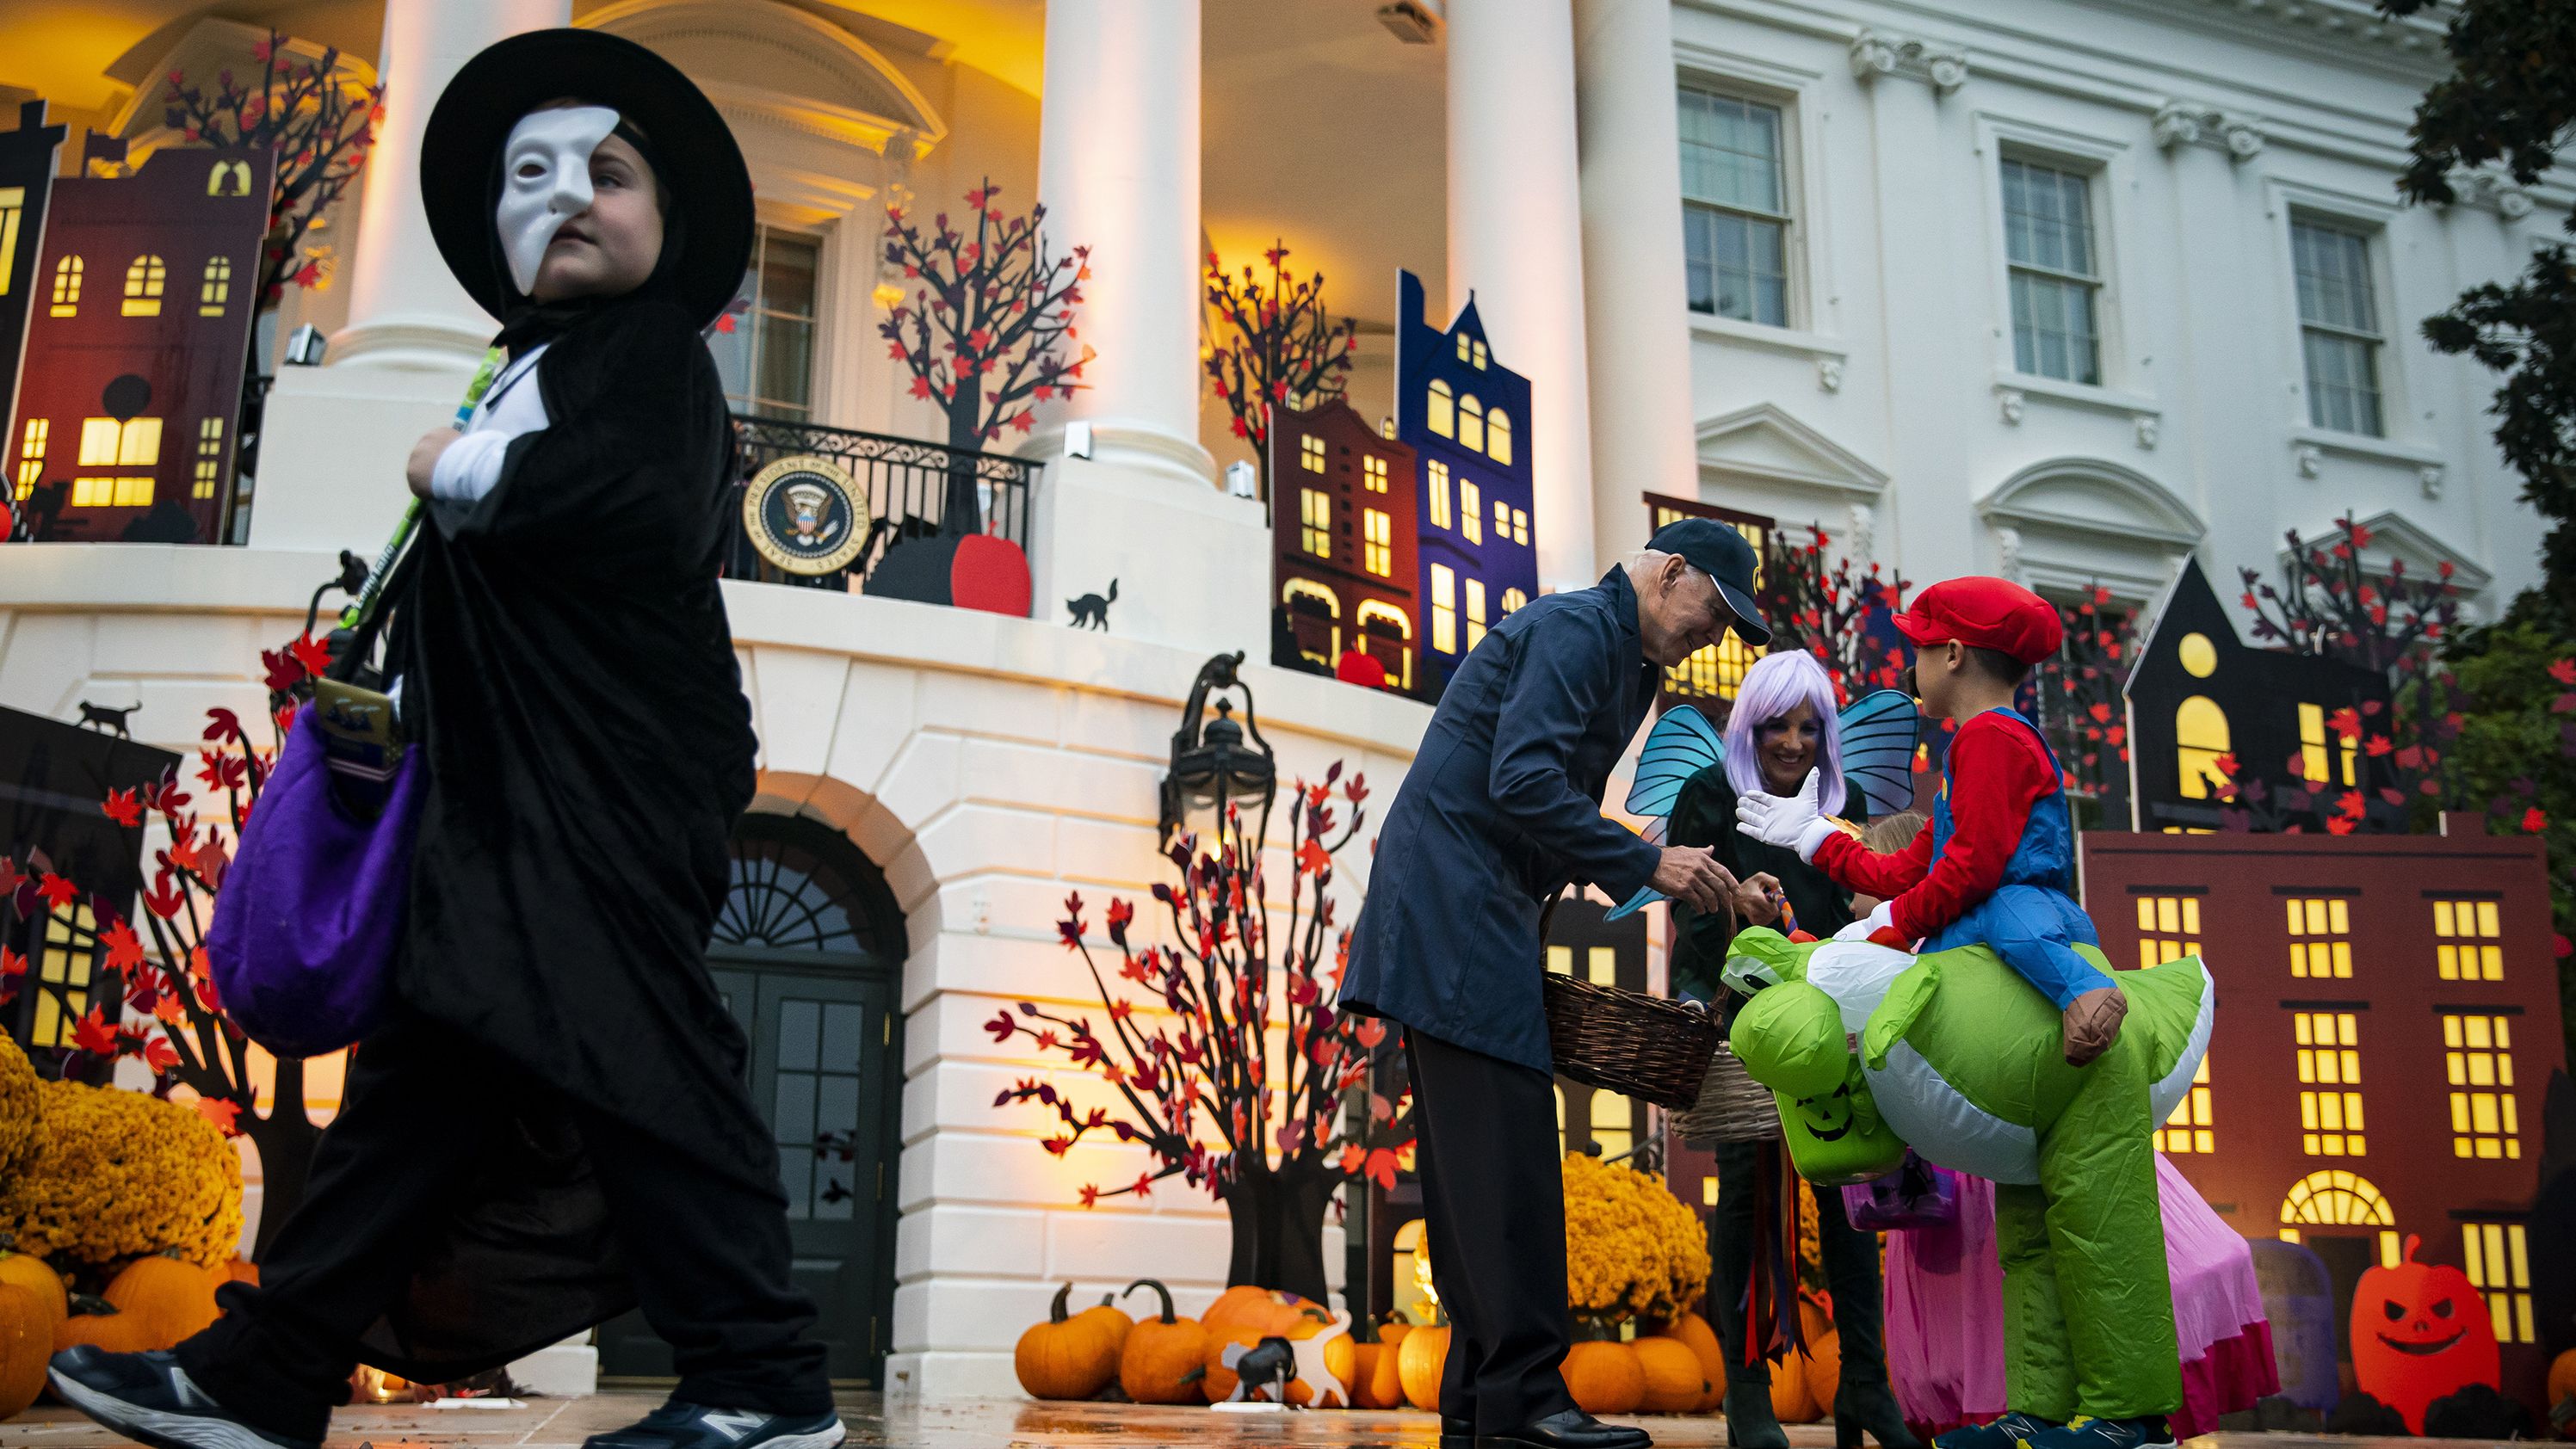 US President Joe Biden and first lady Jill Biden greet children during a Halloween event on the South Lawn of the White House on Monday, October 31.